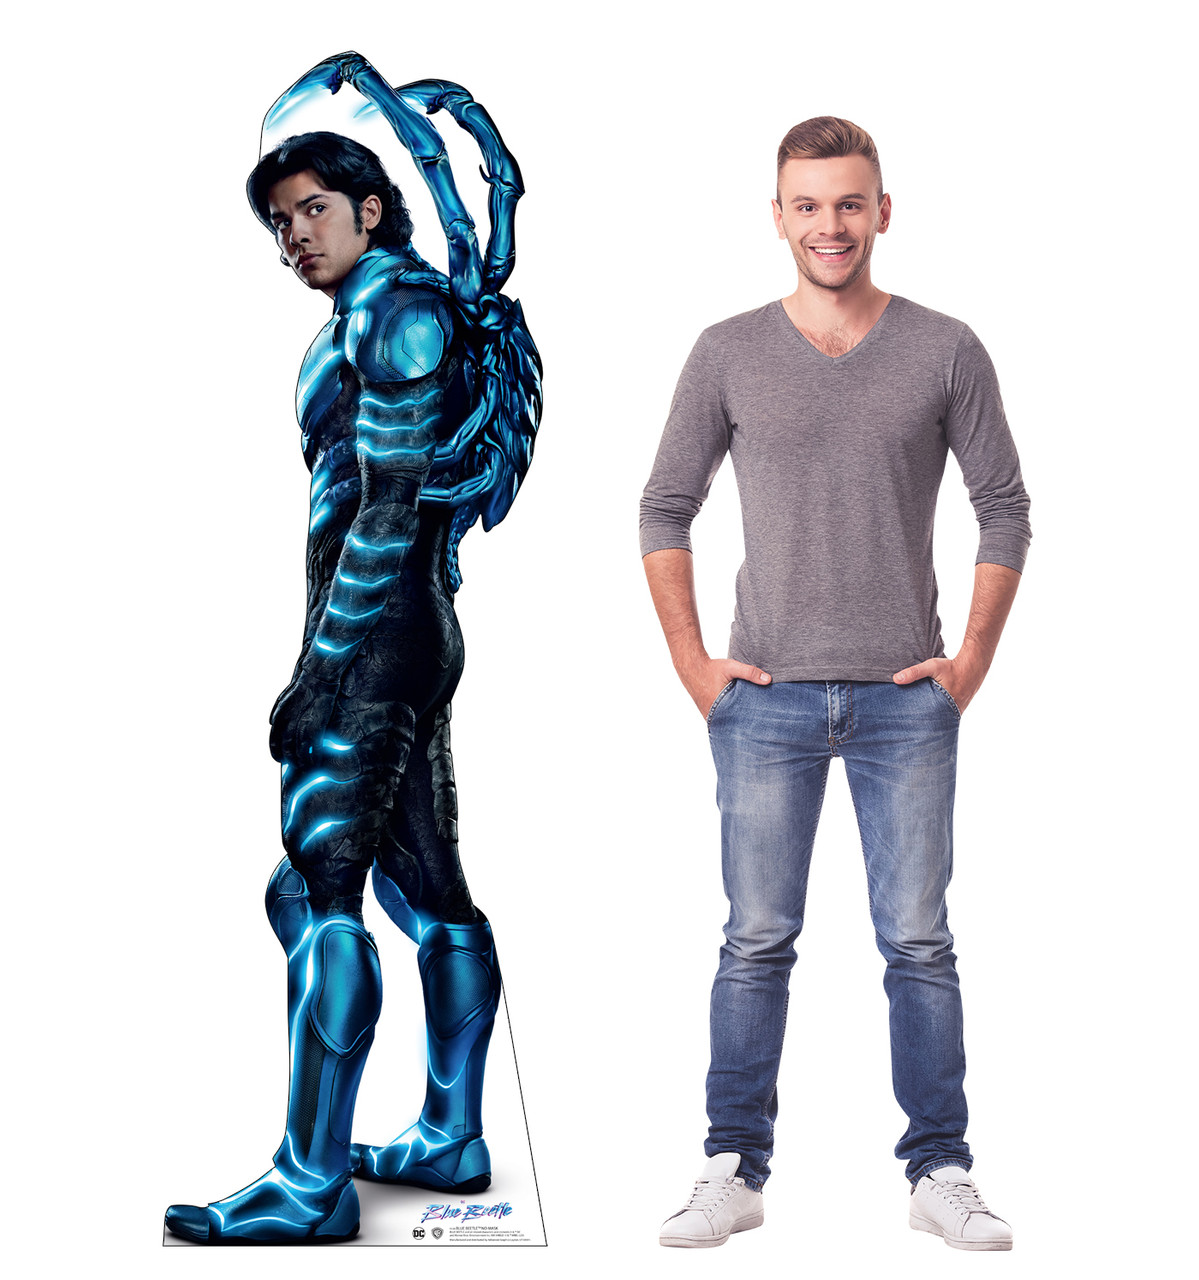 Life-size cardboard standee of the Blue Beetle no mask with model.